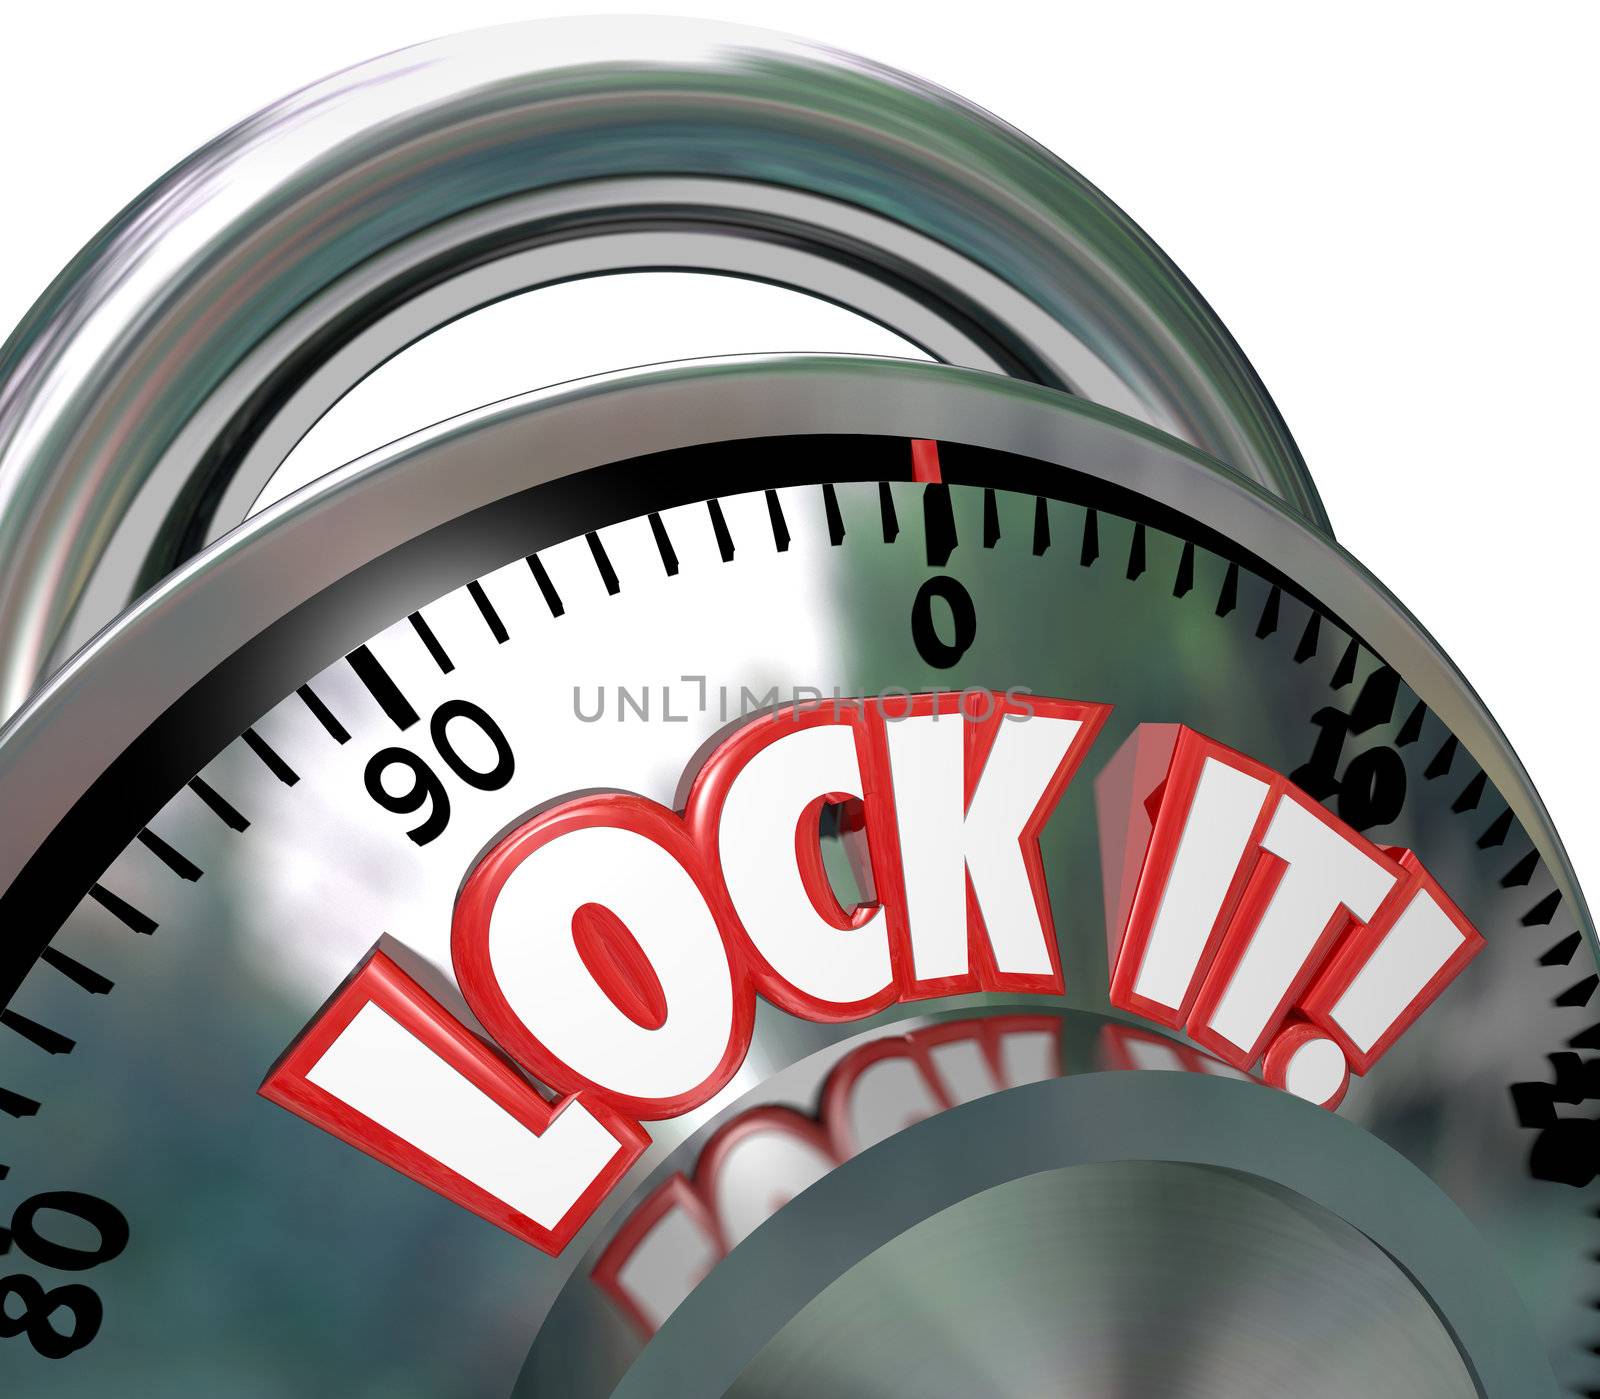 The words Lock It on a metal combination lock to symbolize safe and secure nature of a locked area for security